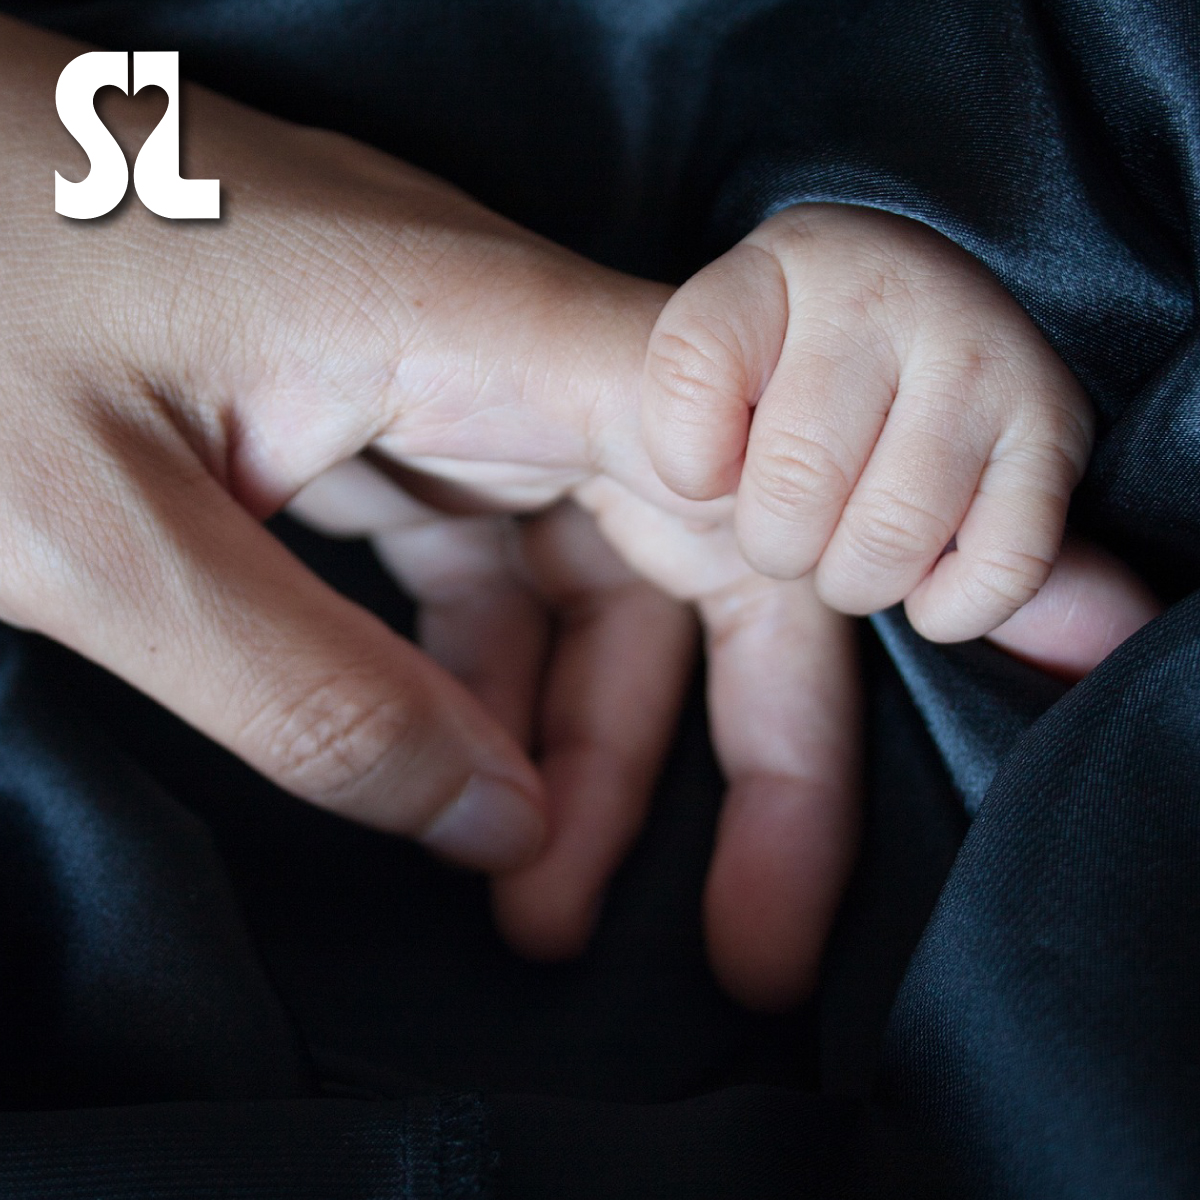 The hands of a caregiver and baby